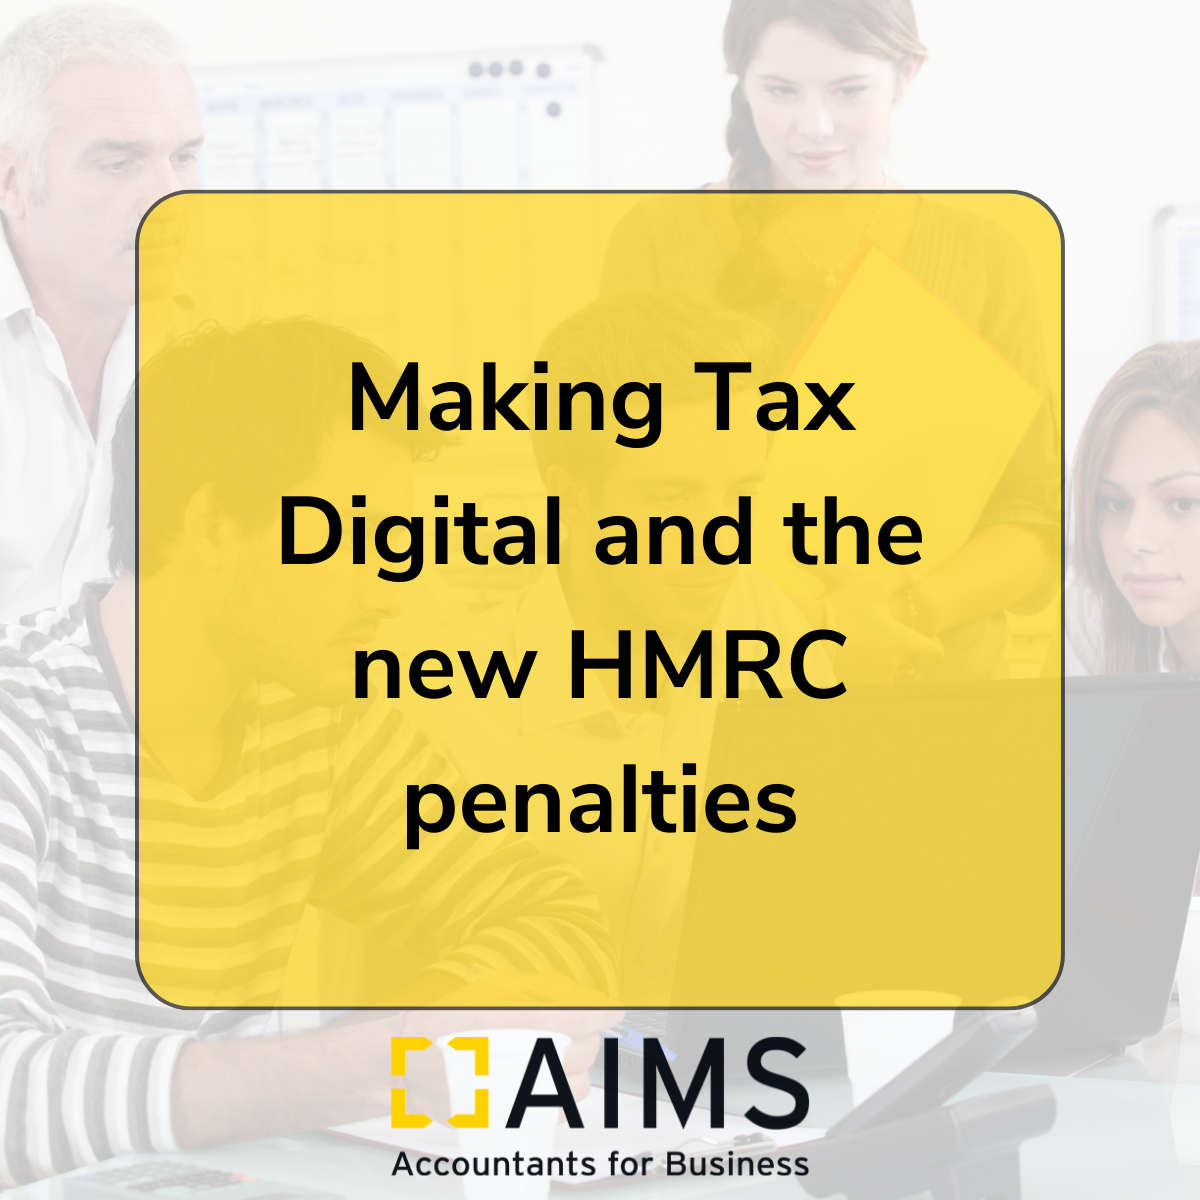 making tax digital and new HMRC penalties title image